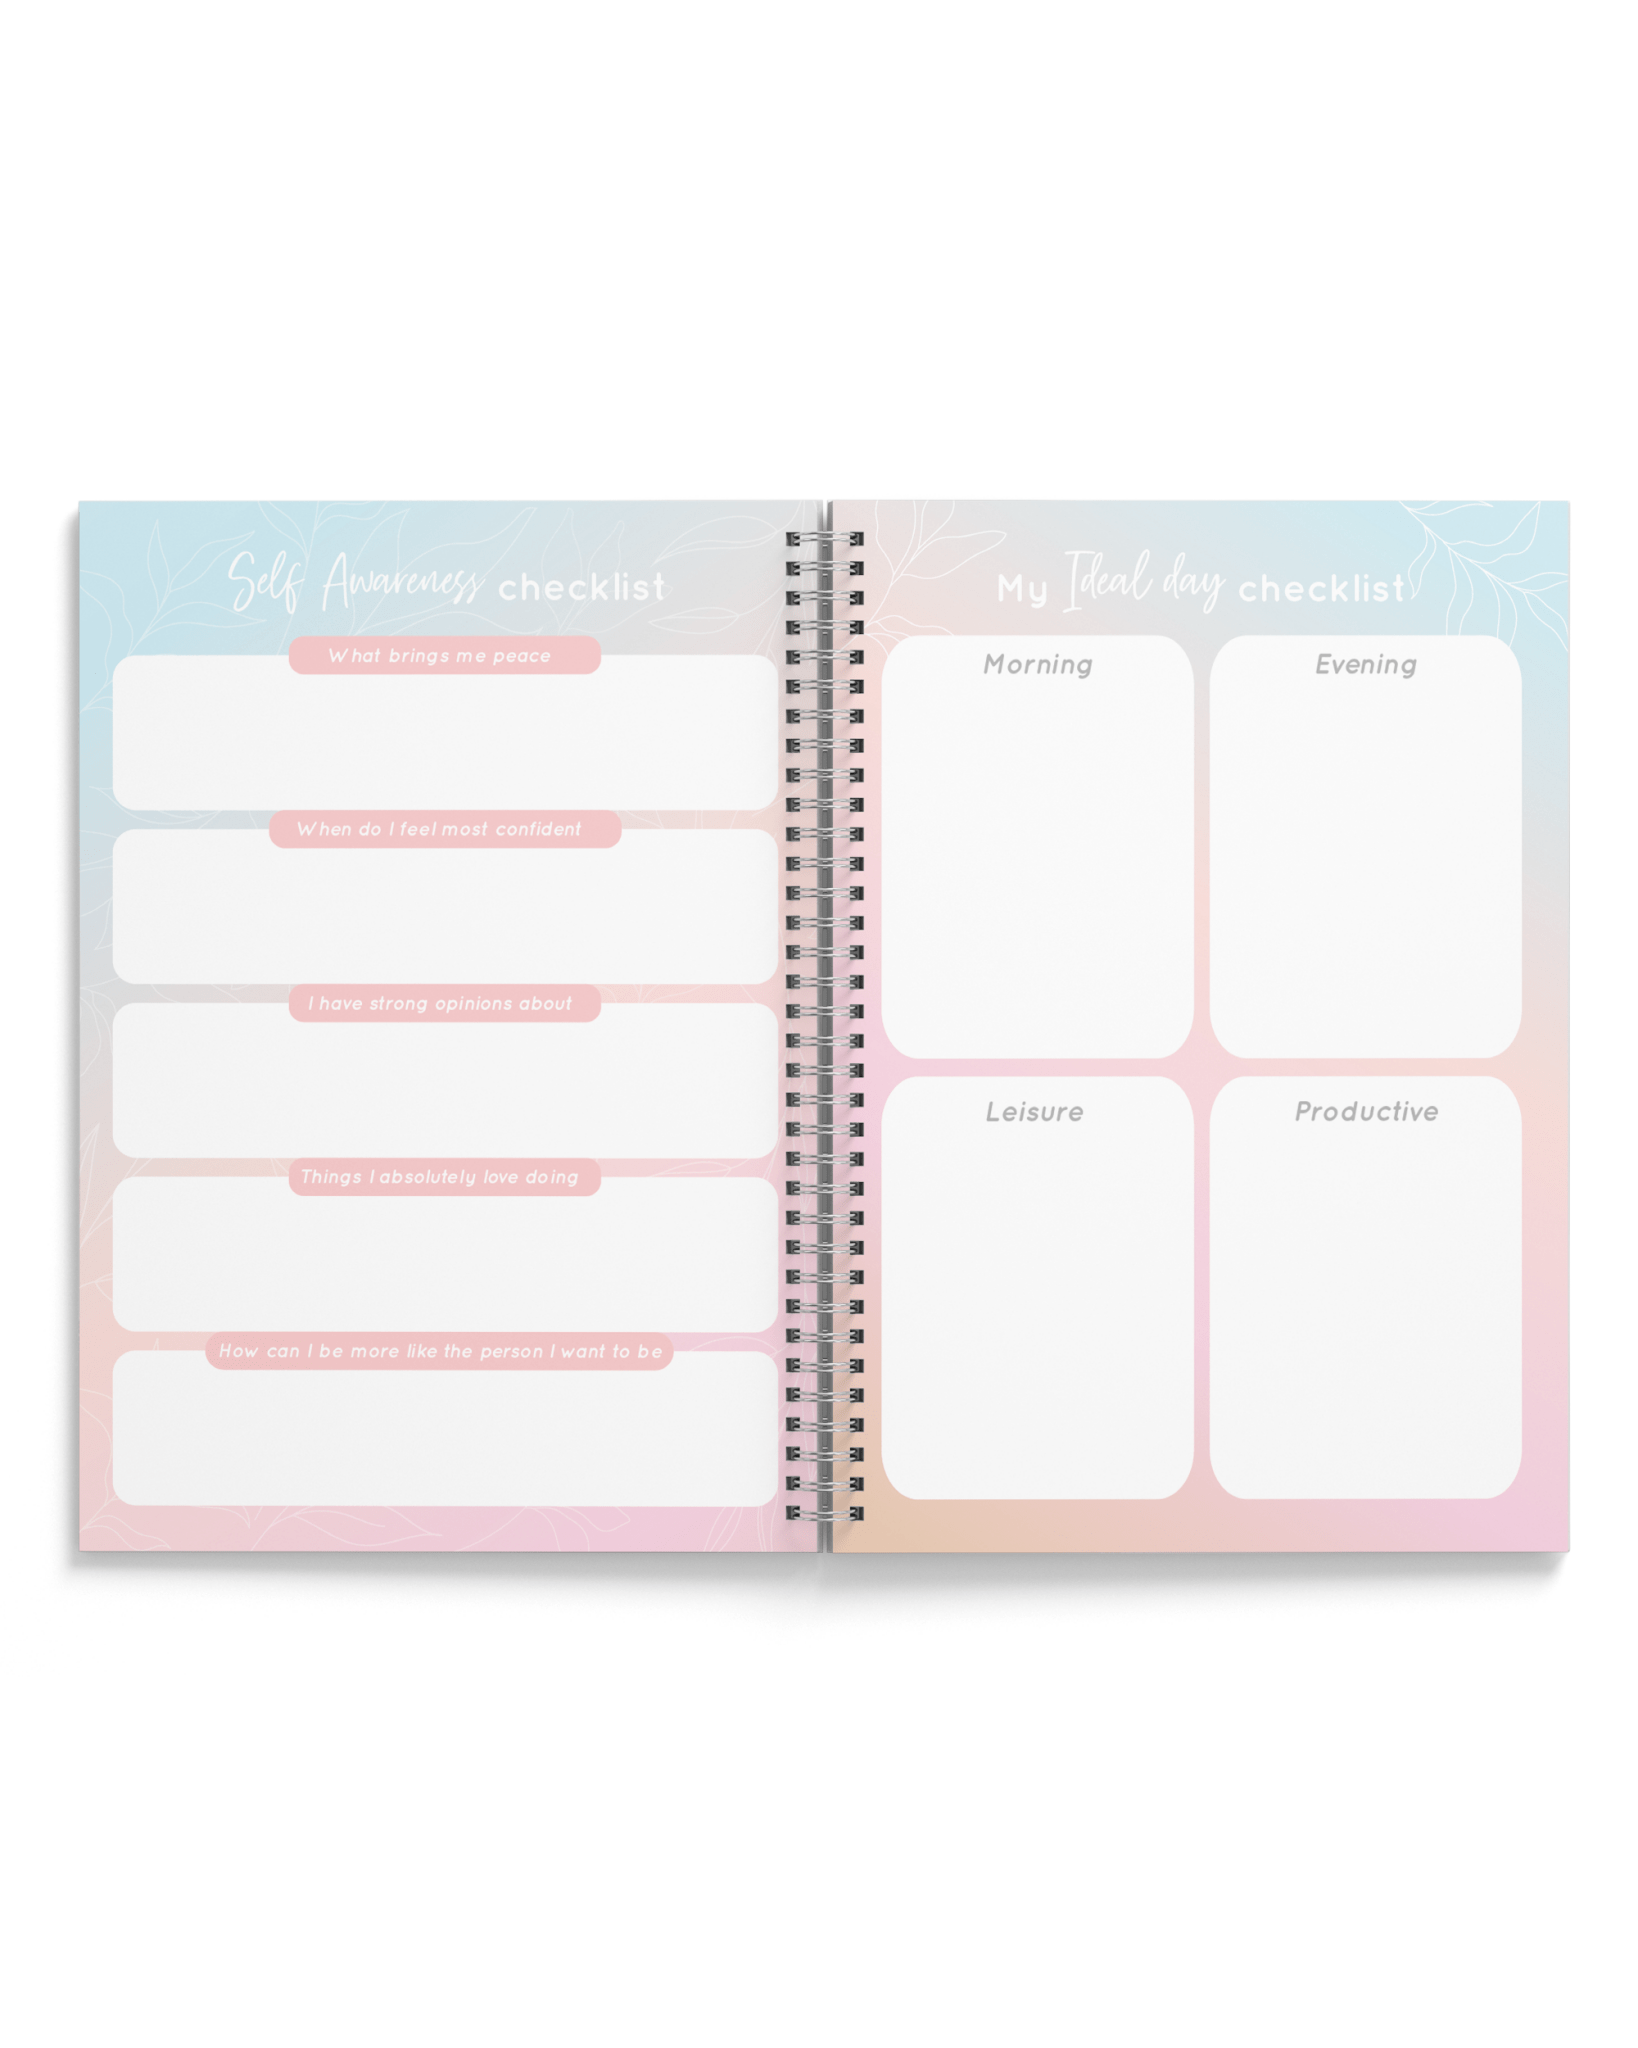 Open for Preorder “Set yourself free" Annual Dated Planner 2024 | A5 Spiral HardBound - Supple Room